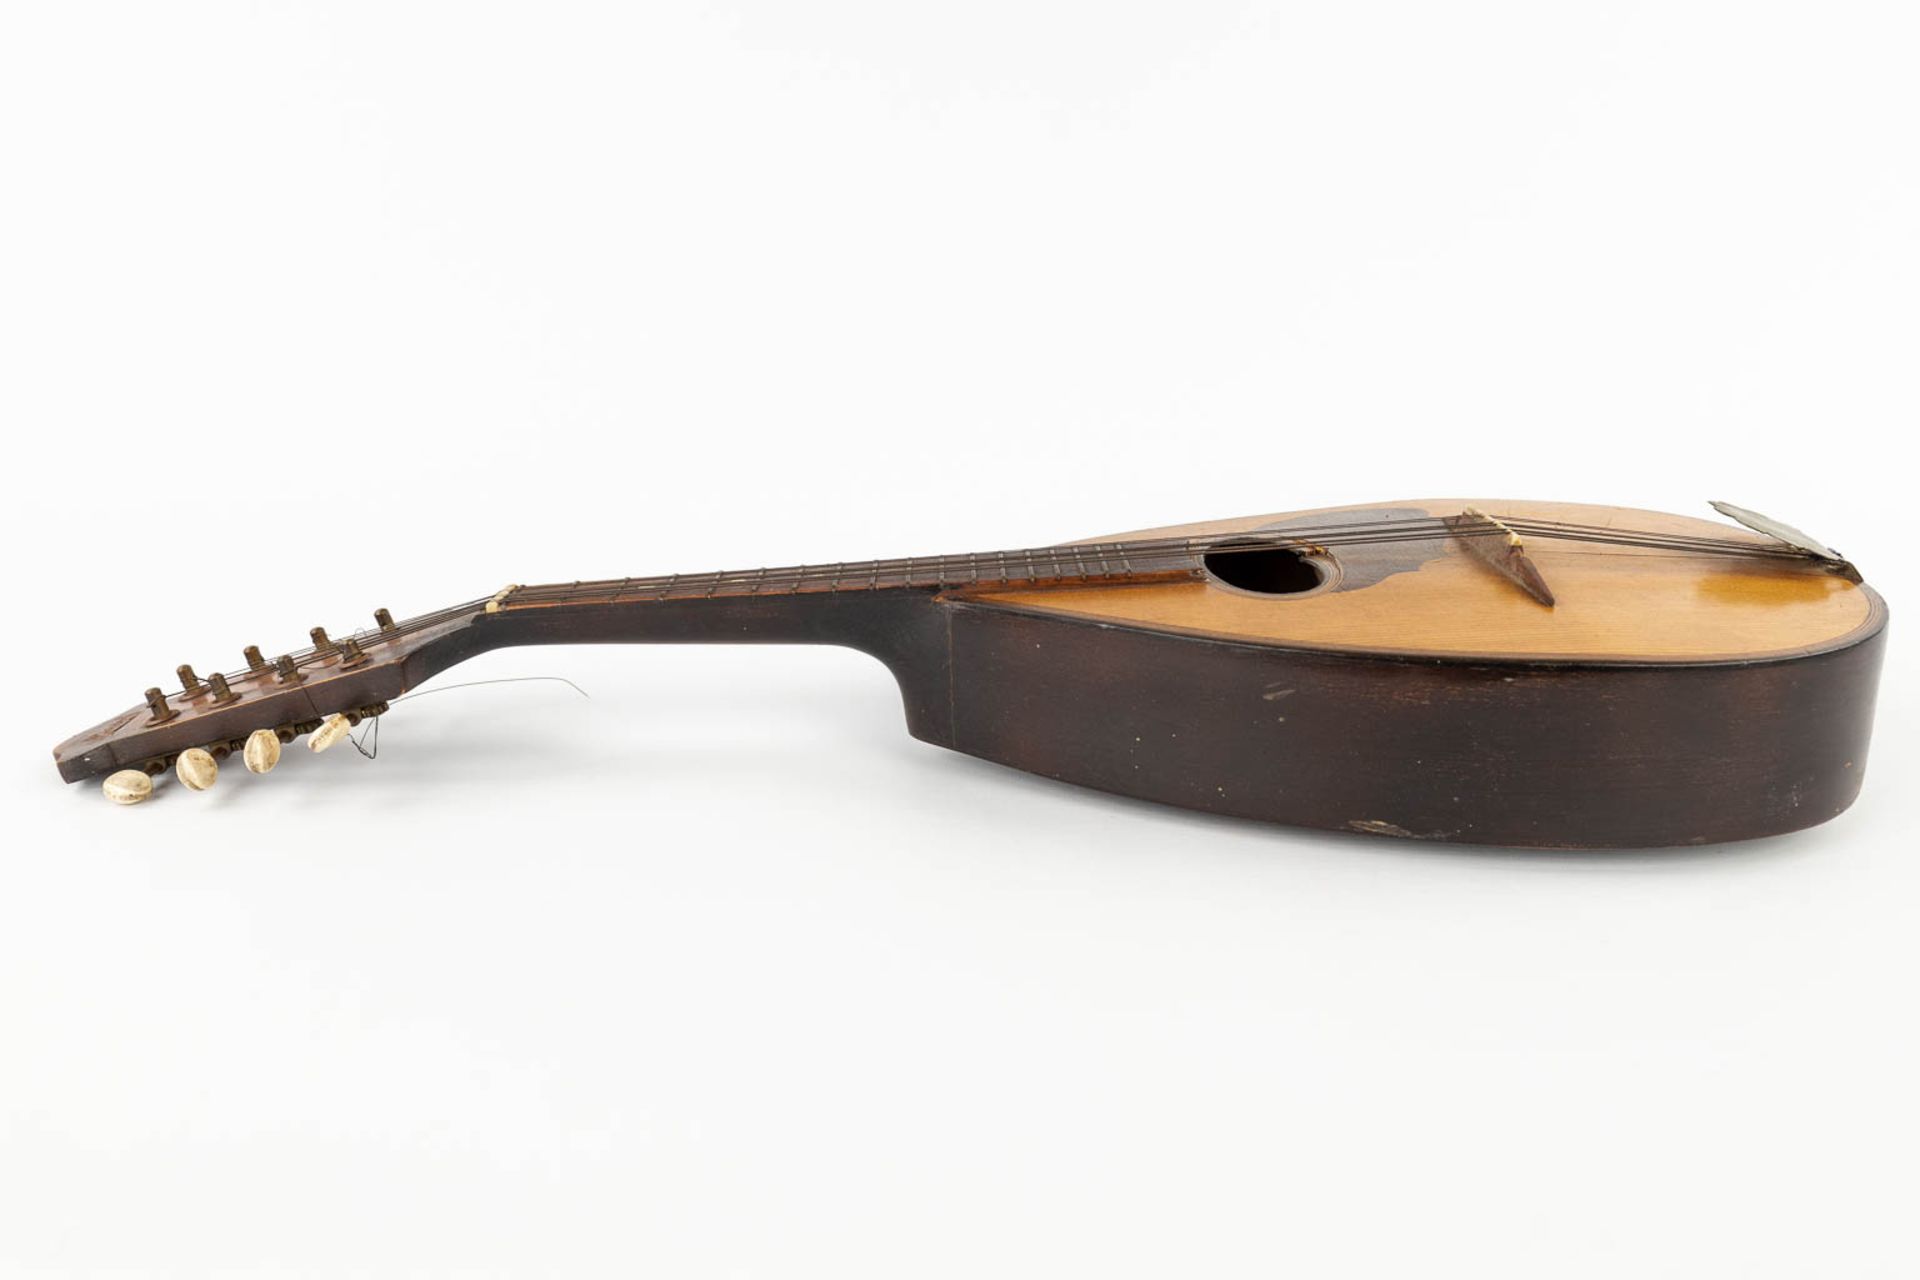 Two mandolines, of which one is marked Fratelli Umberto. (L:20 x W:60 x H:14 cm) - Image 18 of 20